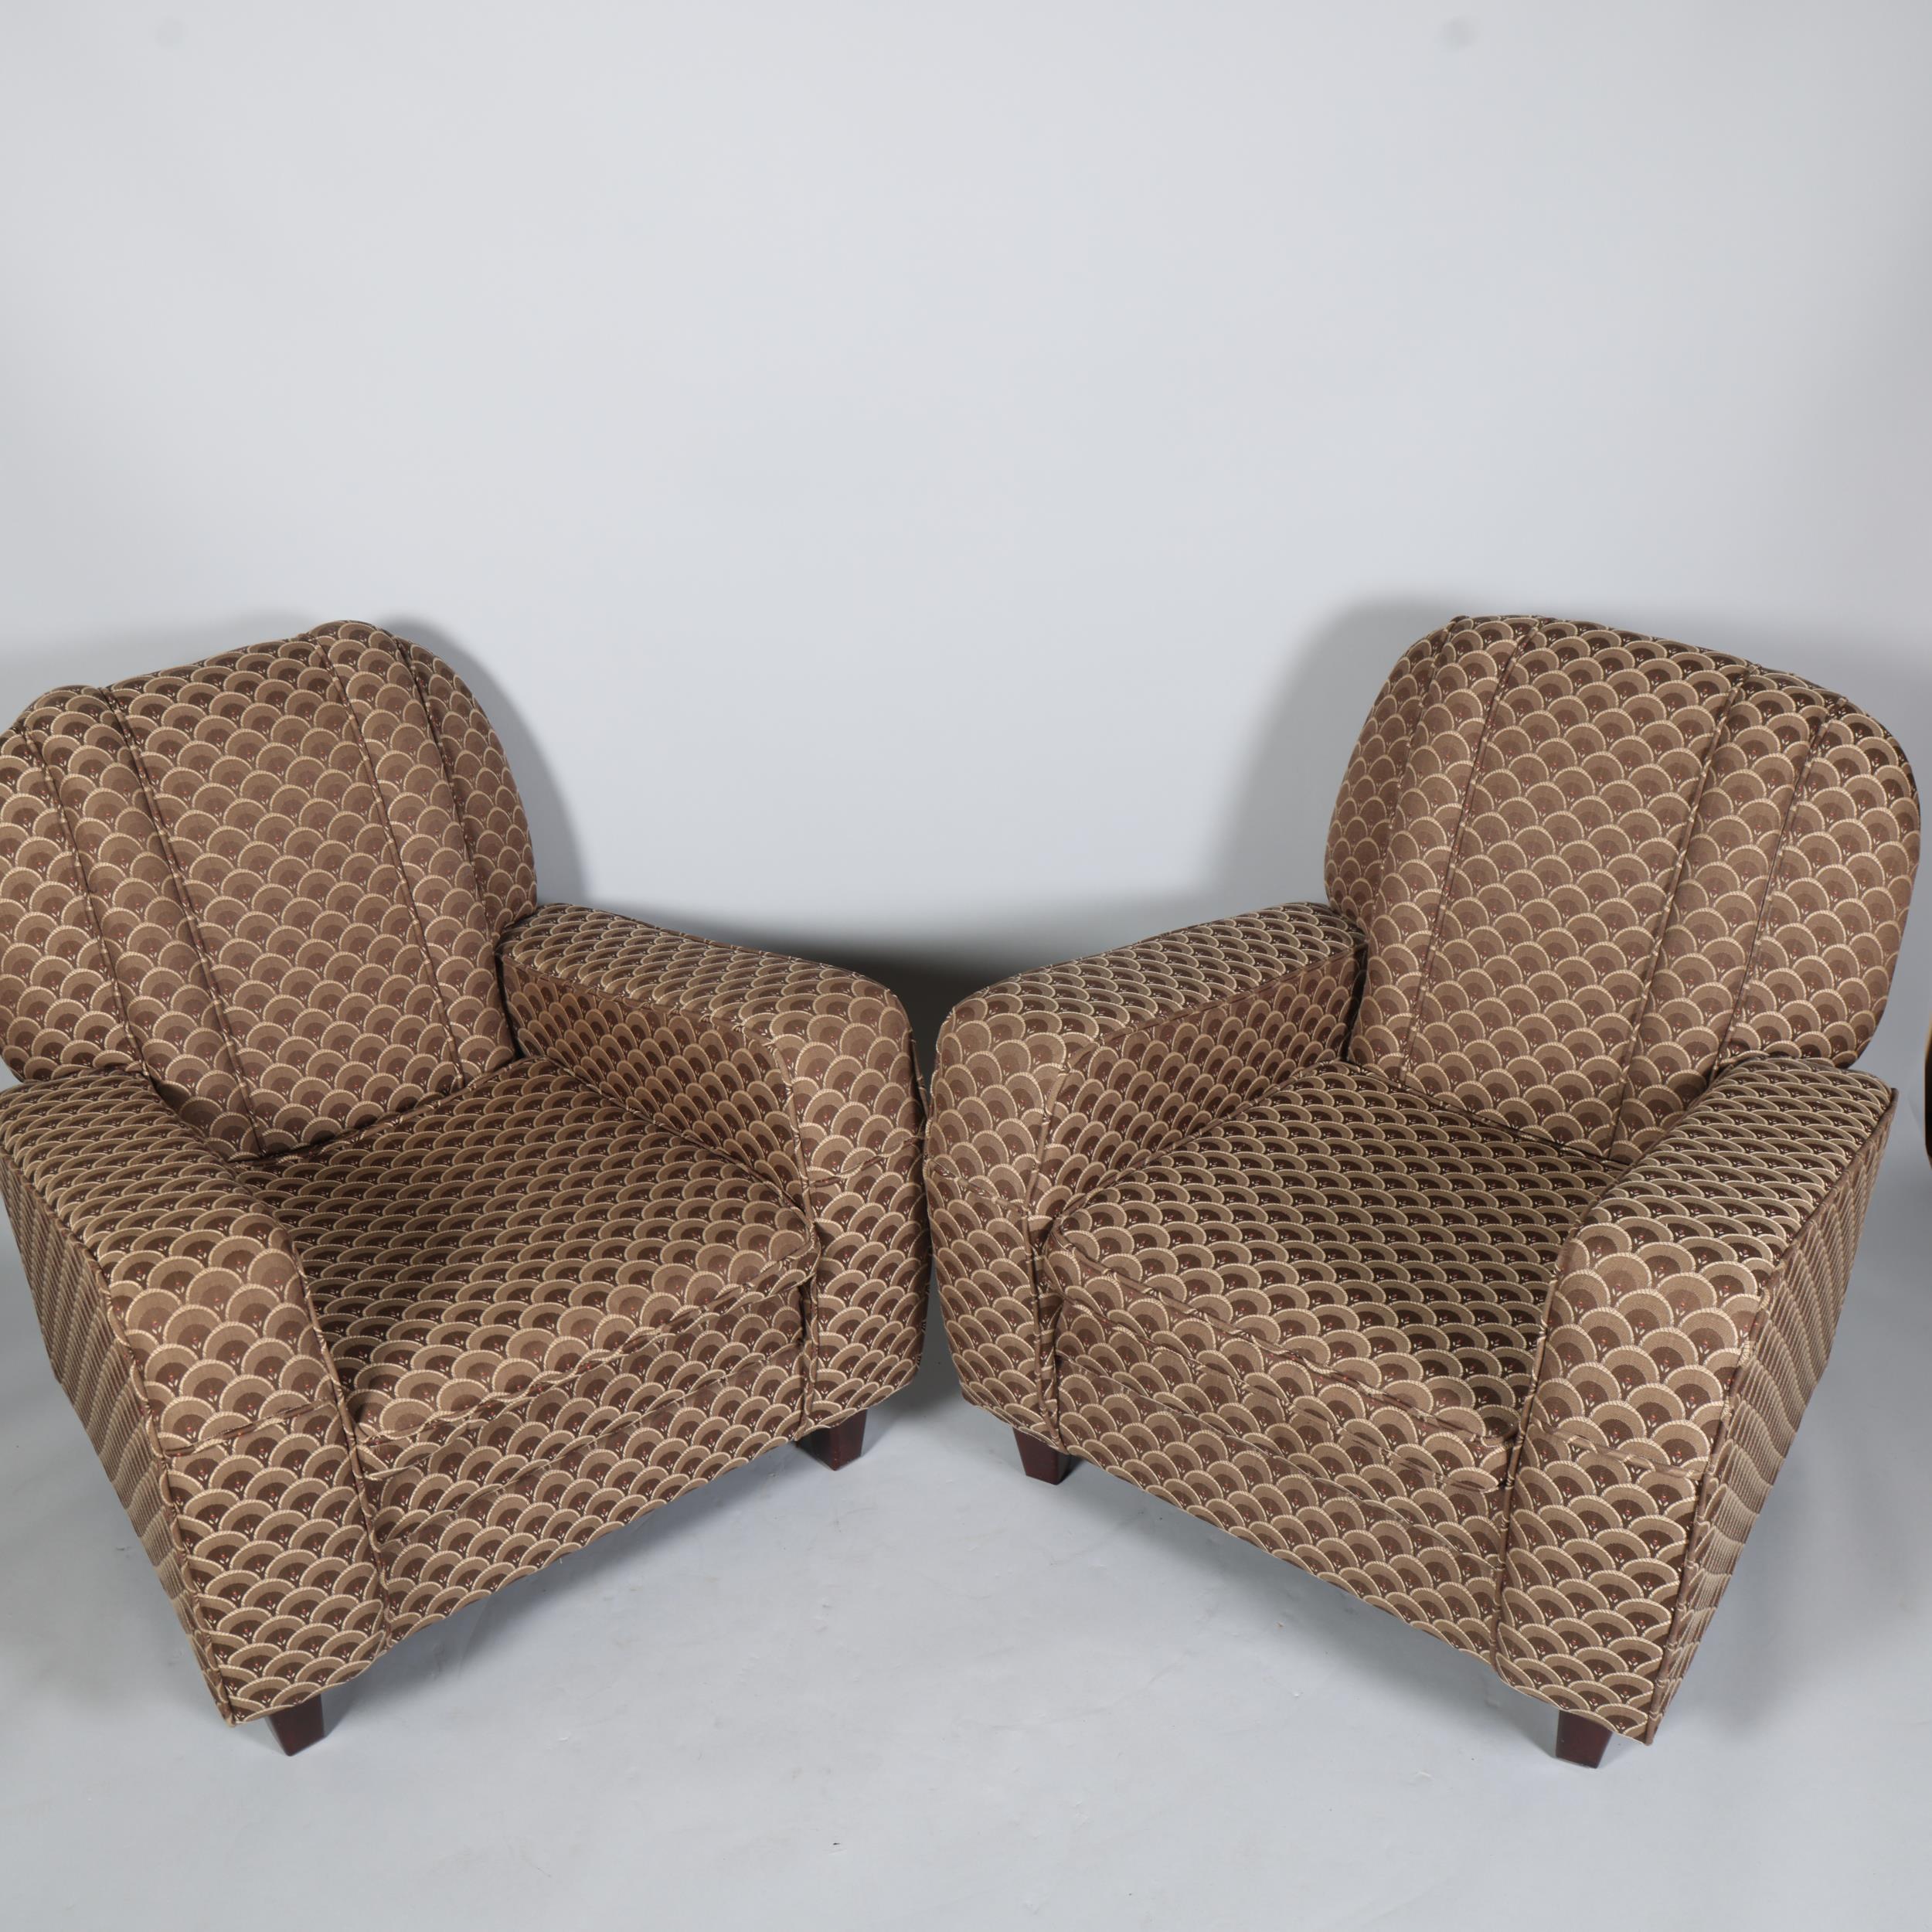 Pair of Art Deco style upholstered armchairs, overall arm width 82cm - Image 3 of 4